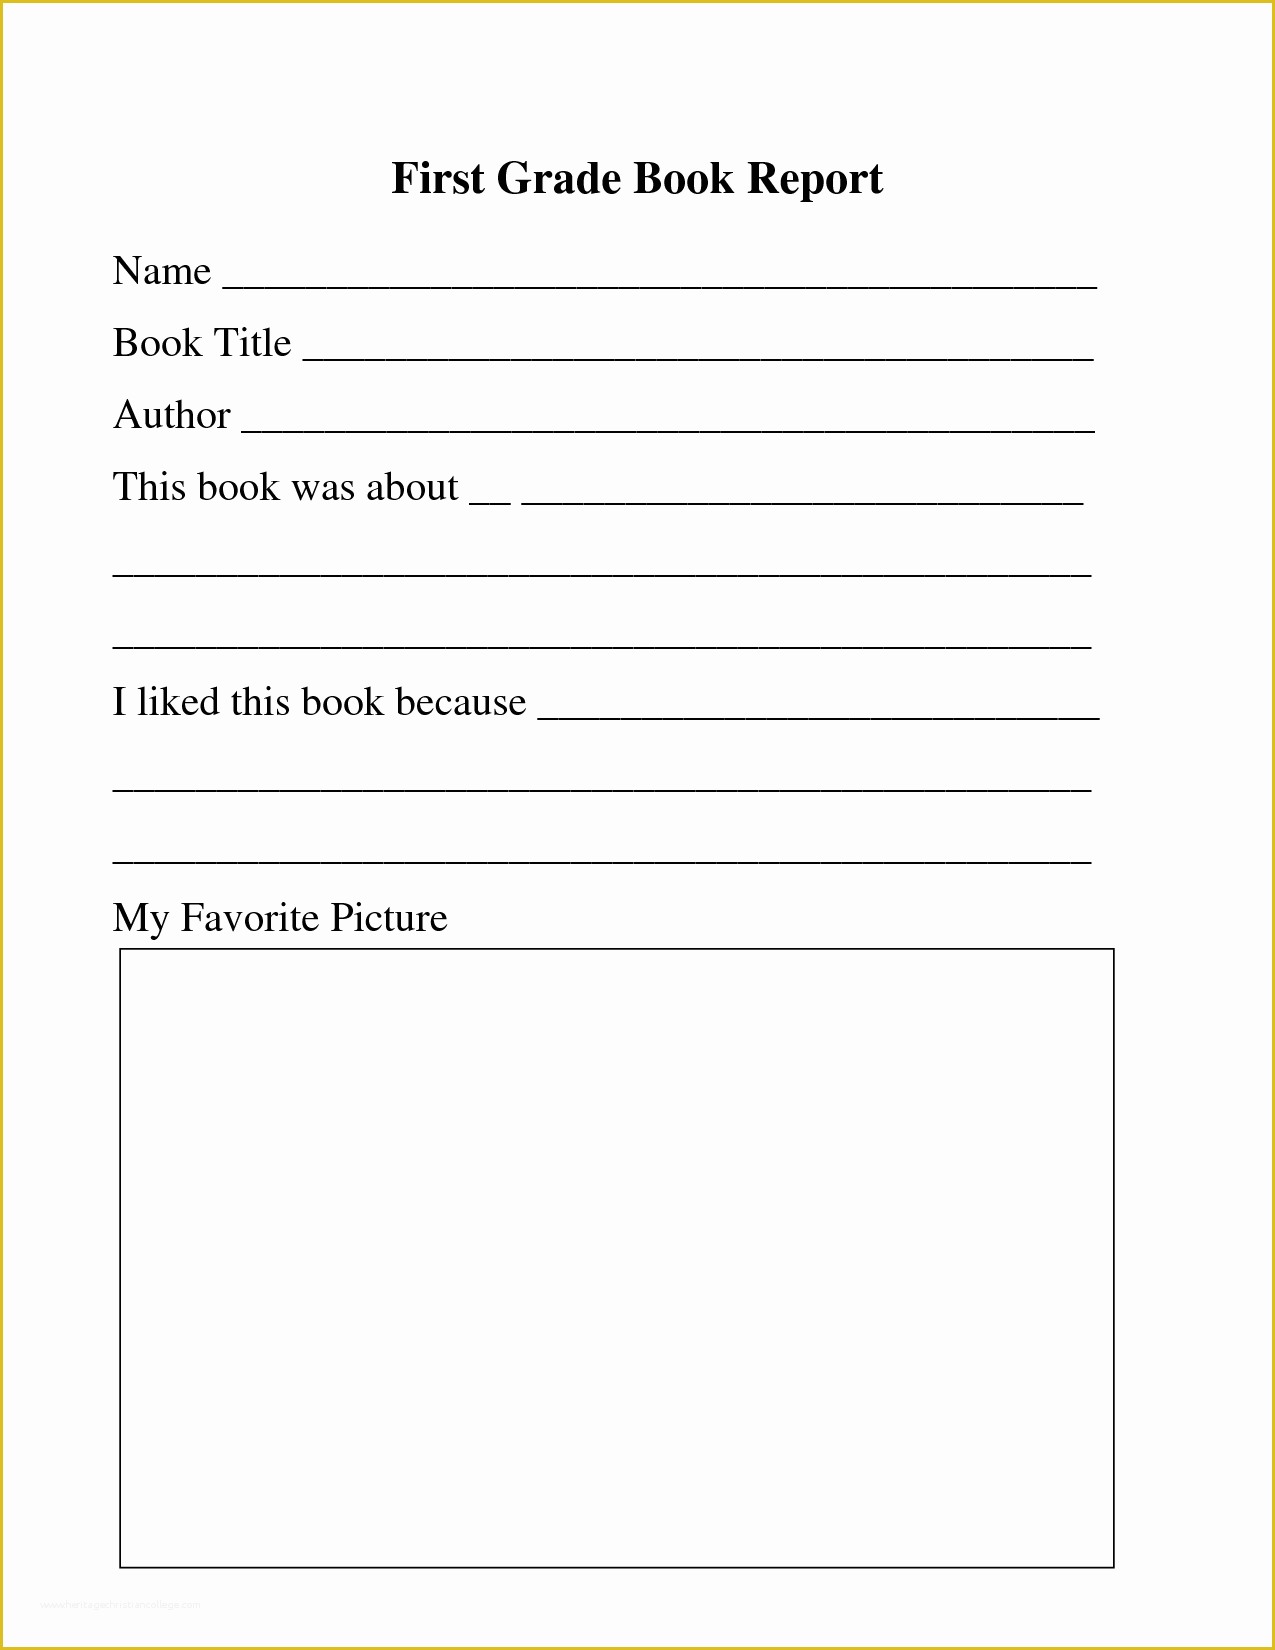 2nd Grade Book Report Template Free Of Book Report Templates First Grade 1000 Ideas About Book